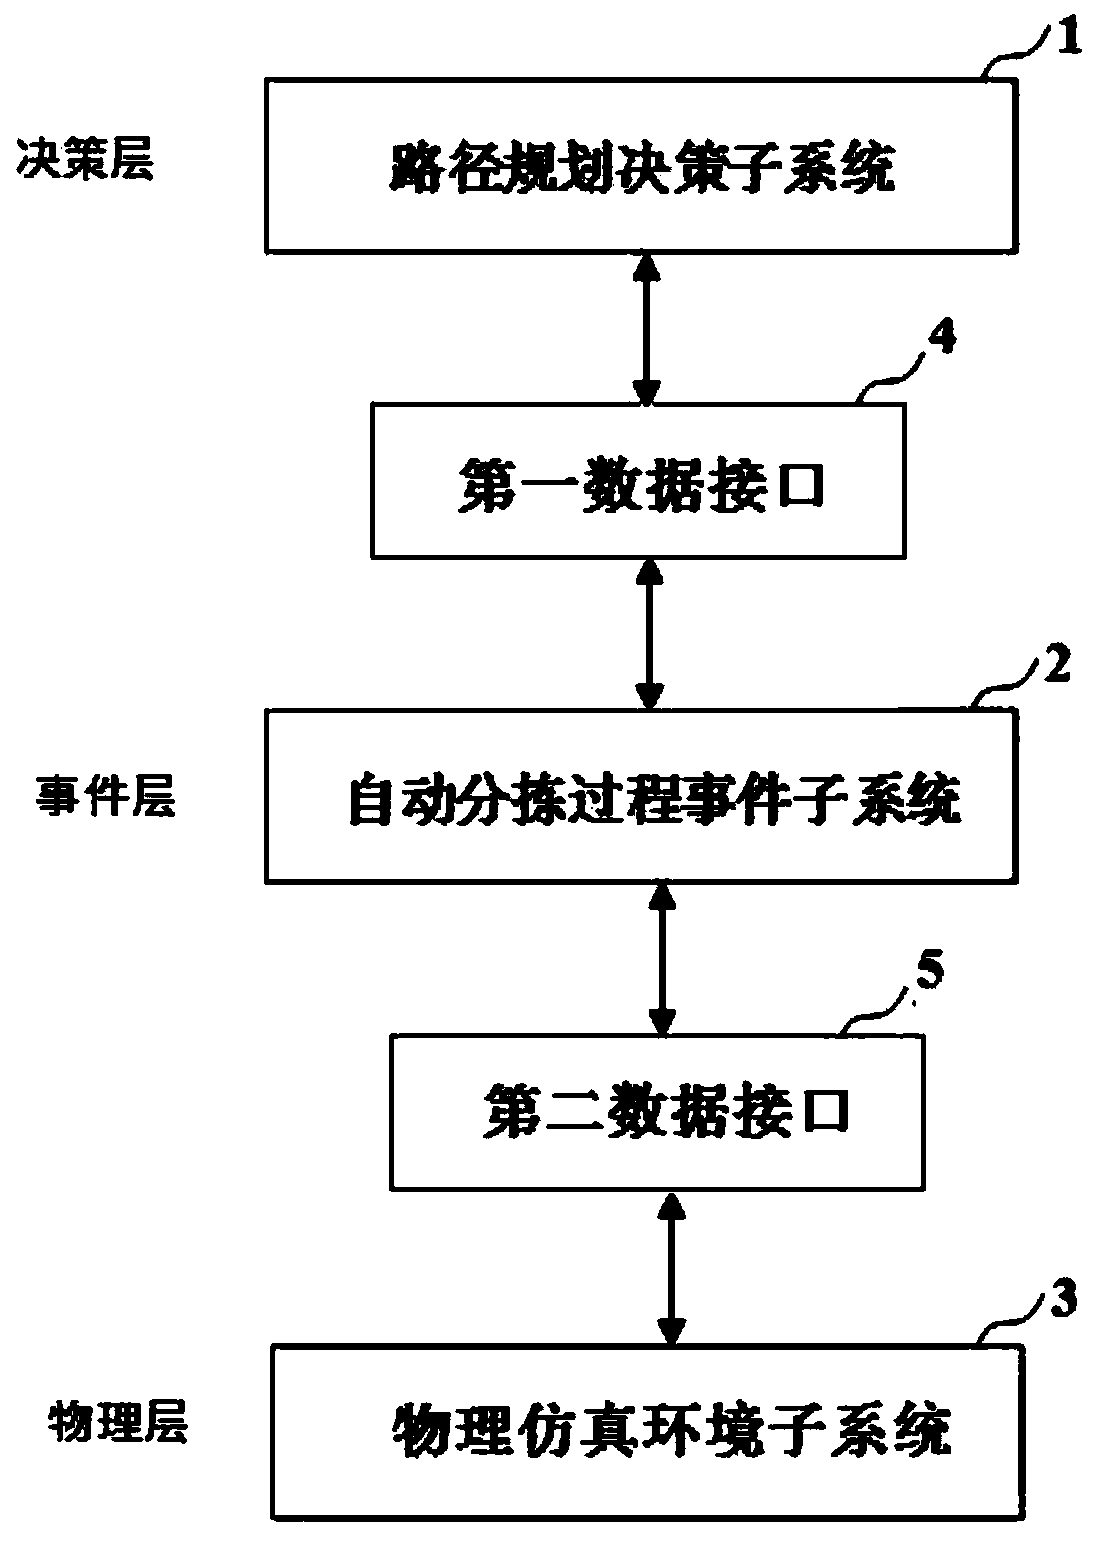 Automatic sorting control and decision making system based on M-HSTPN model